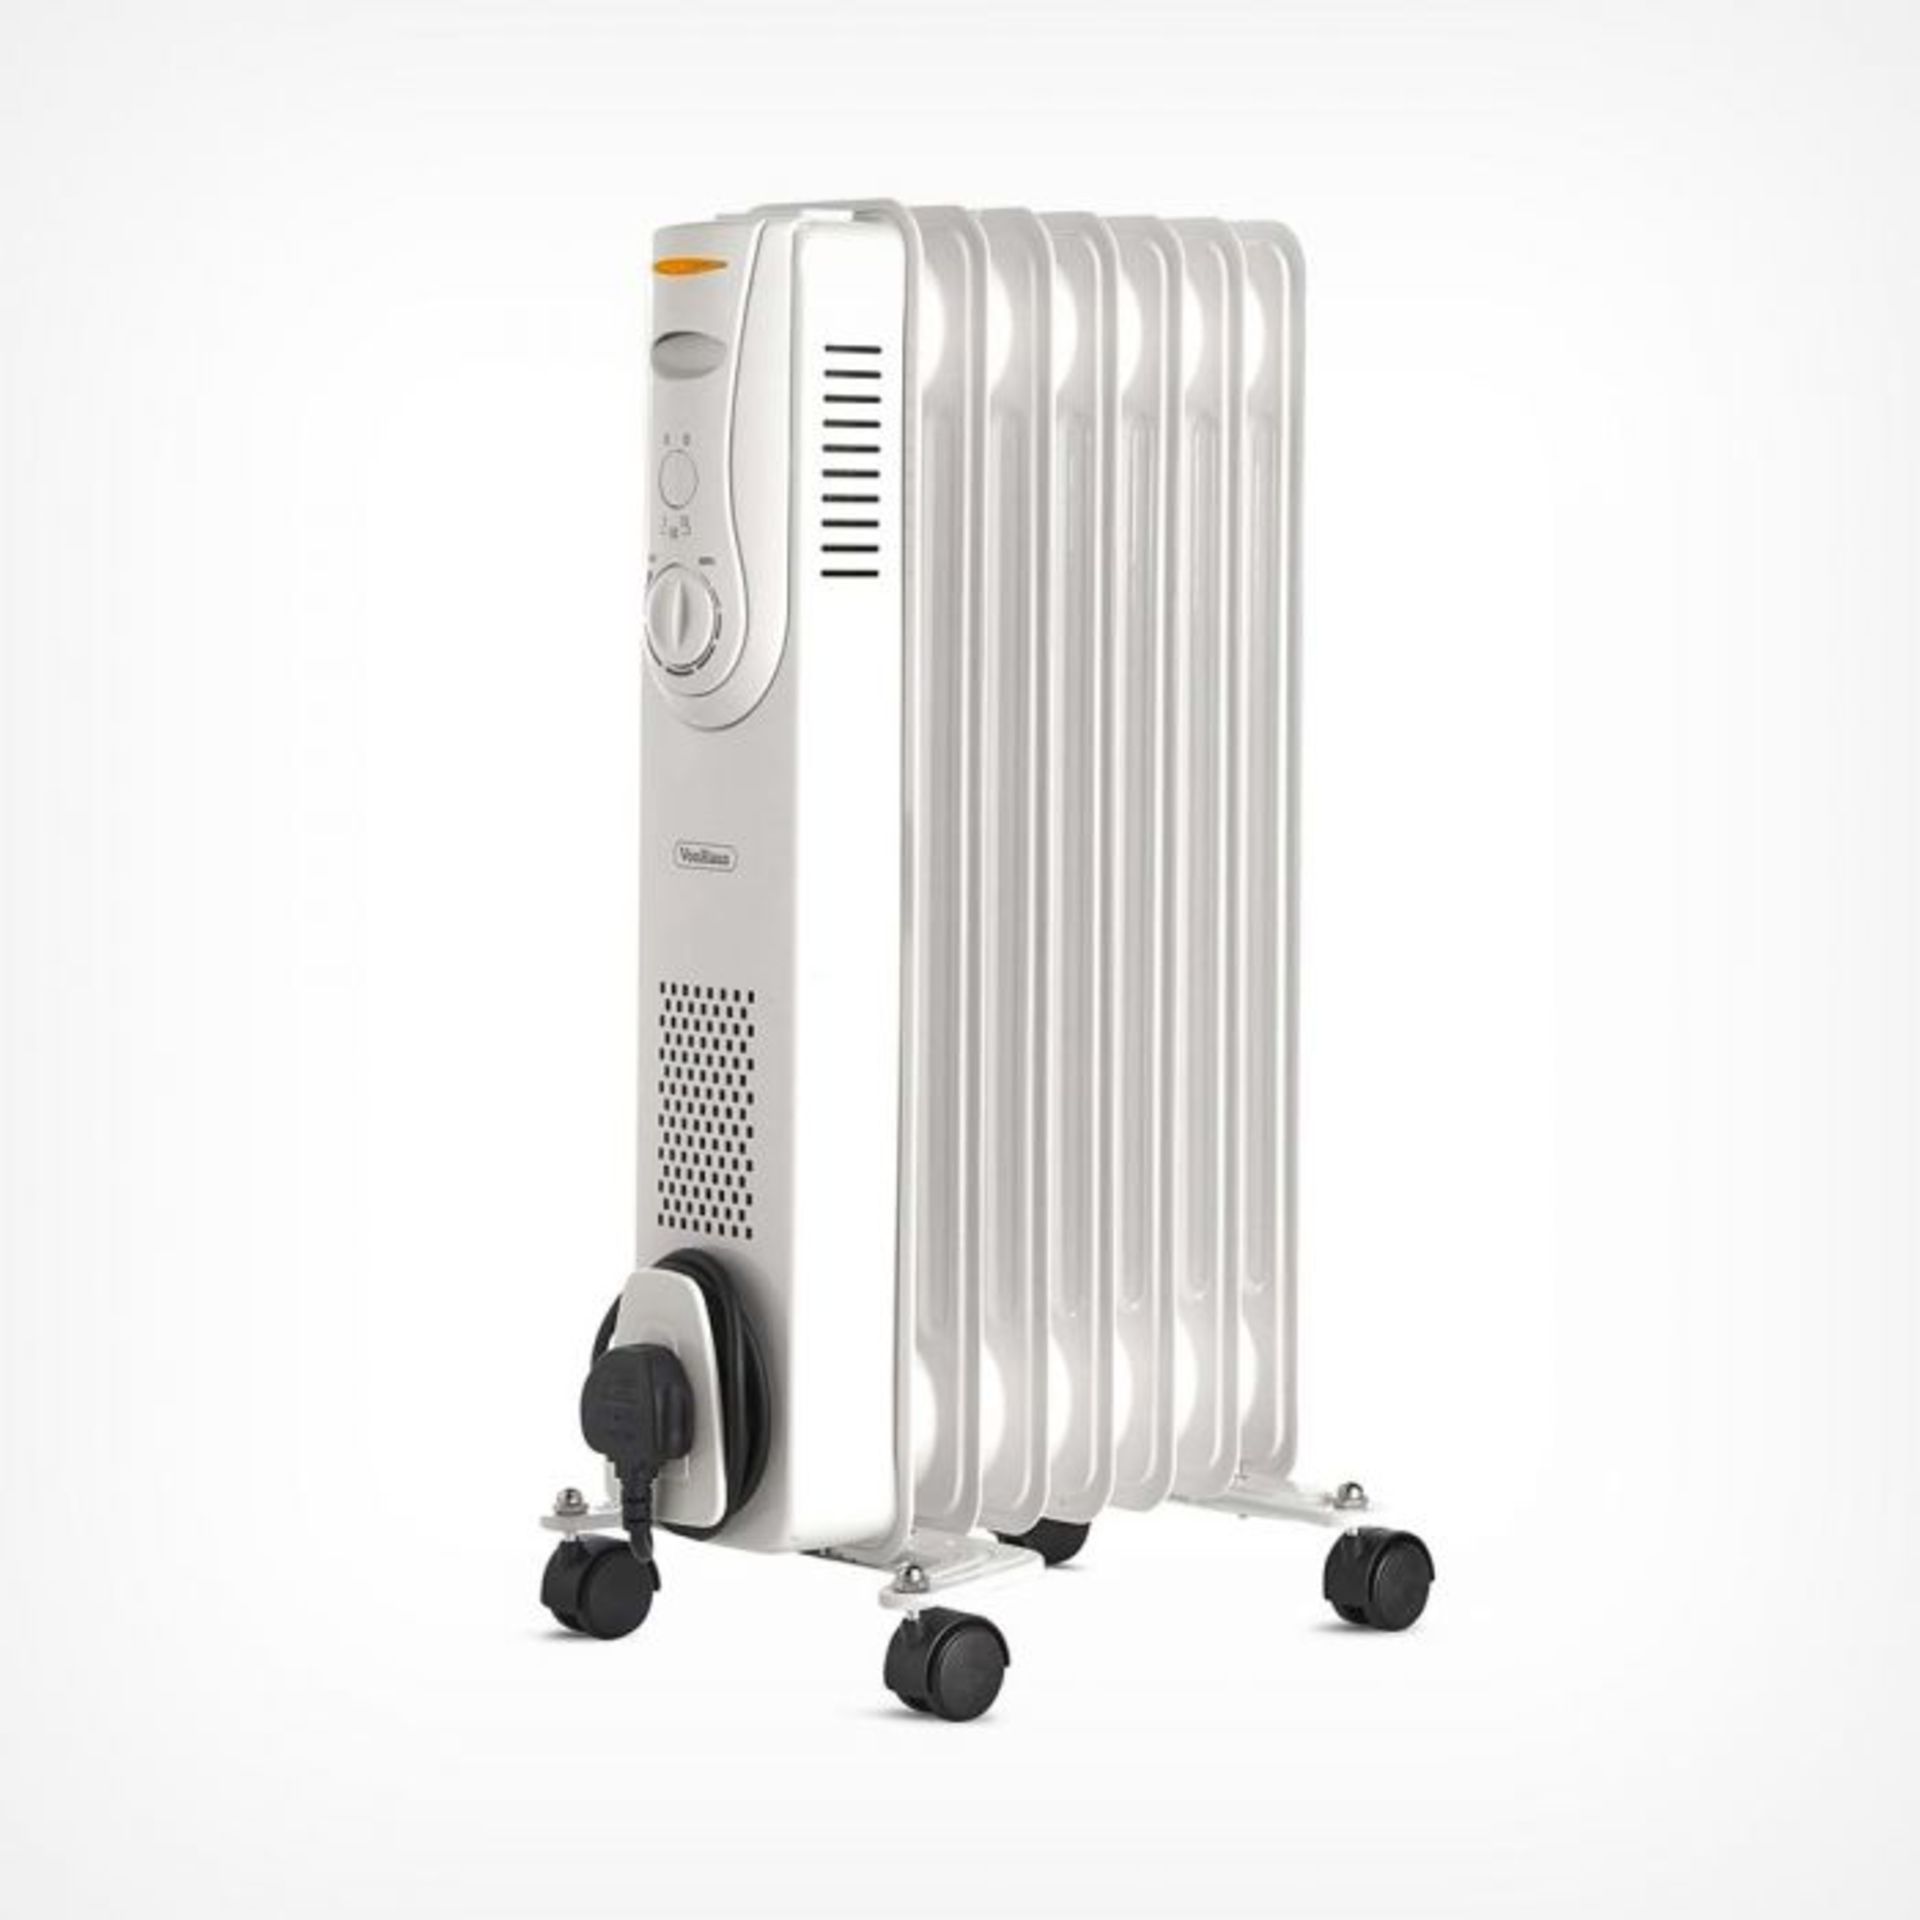 (V159) 7 Fin 1500W Oil Filled Radiator - White Powerful 1500W radiator with 7 oil-filled fins ... - Image 2 of 3